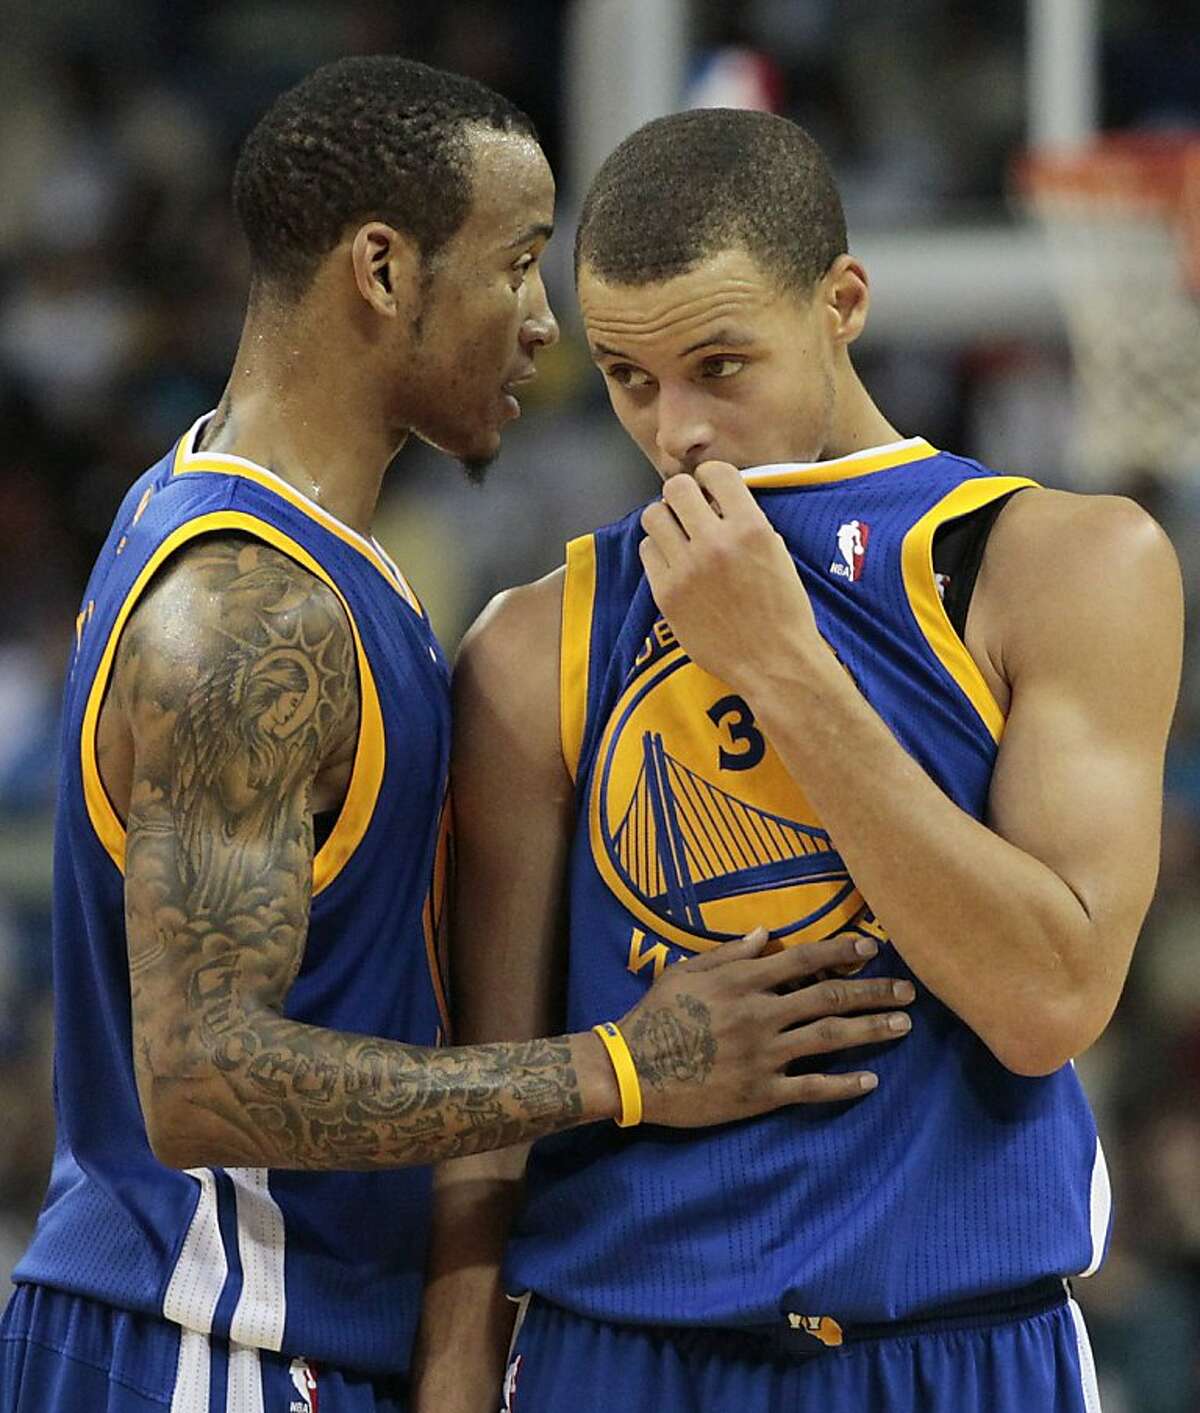 Golden State Warriors guard Monta Ellis, left, speaks with teammate Stephen Curry in the second half of an NBA basketball game against the New Orleans Hornets in New Orleans, Wednesday, Jan. 5, 2011. Ellis and Curry contributed 29 and 21 points, respectively, to Golden State's 110-103 win over New Orleans.